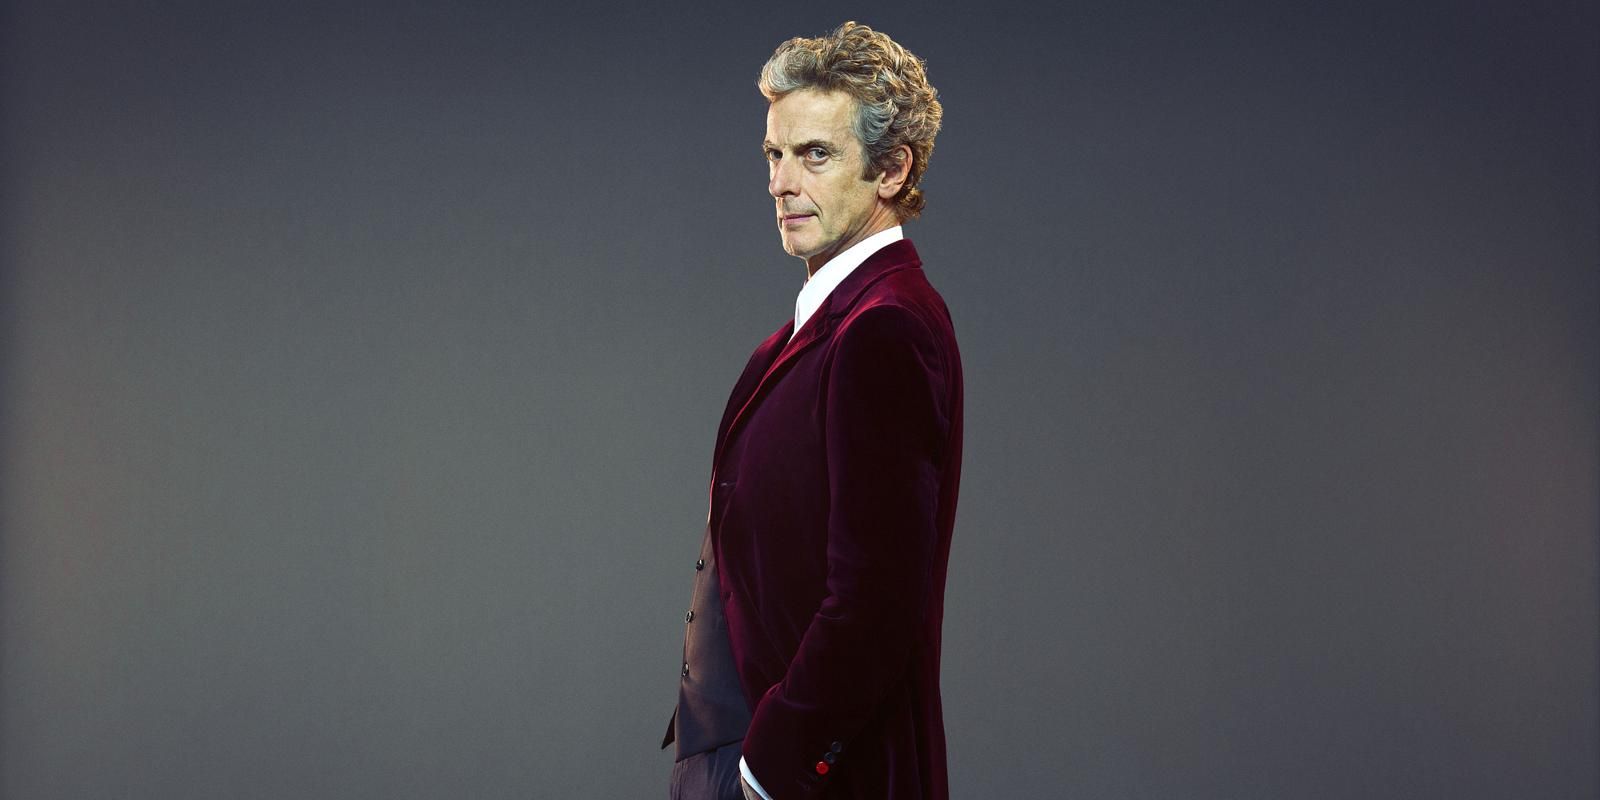 Doctor Who 10 Unpopular Opinions About The Twelfth Doctor (According To Reddit)